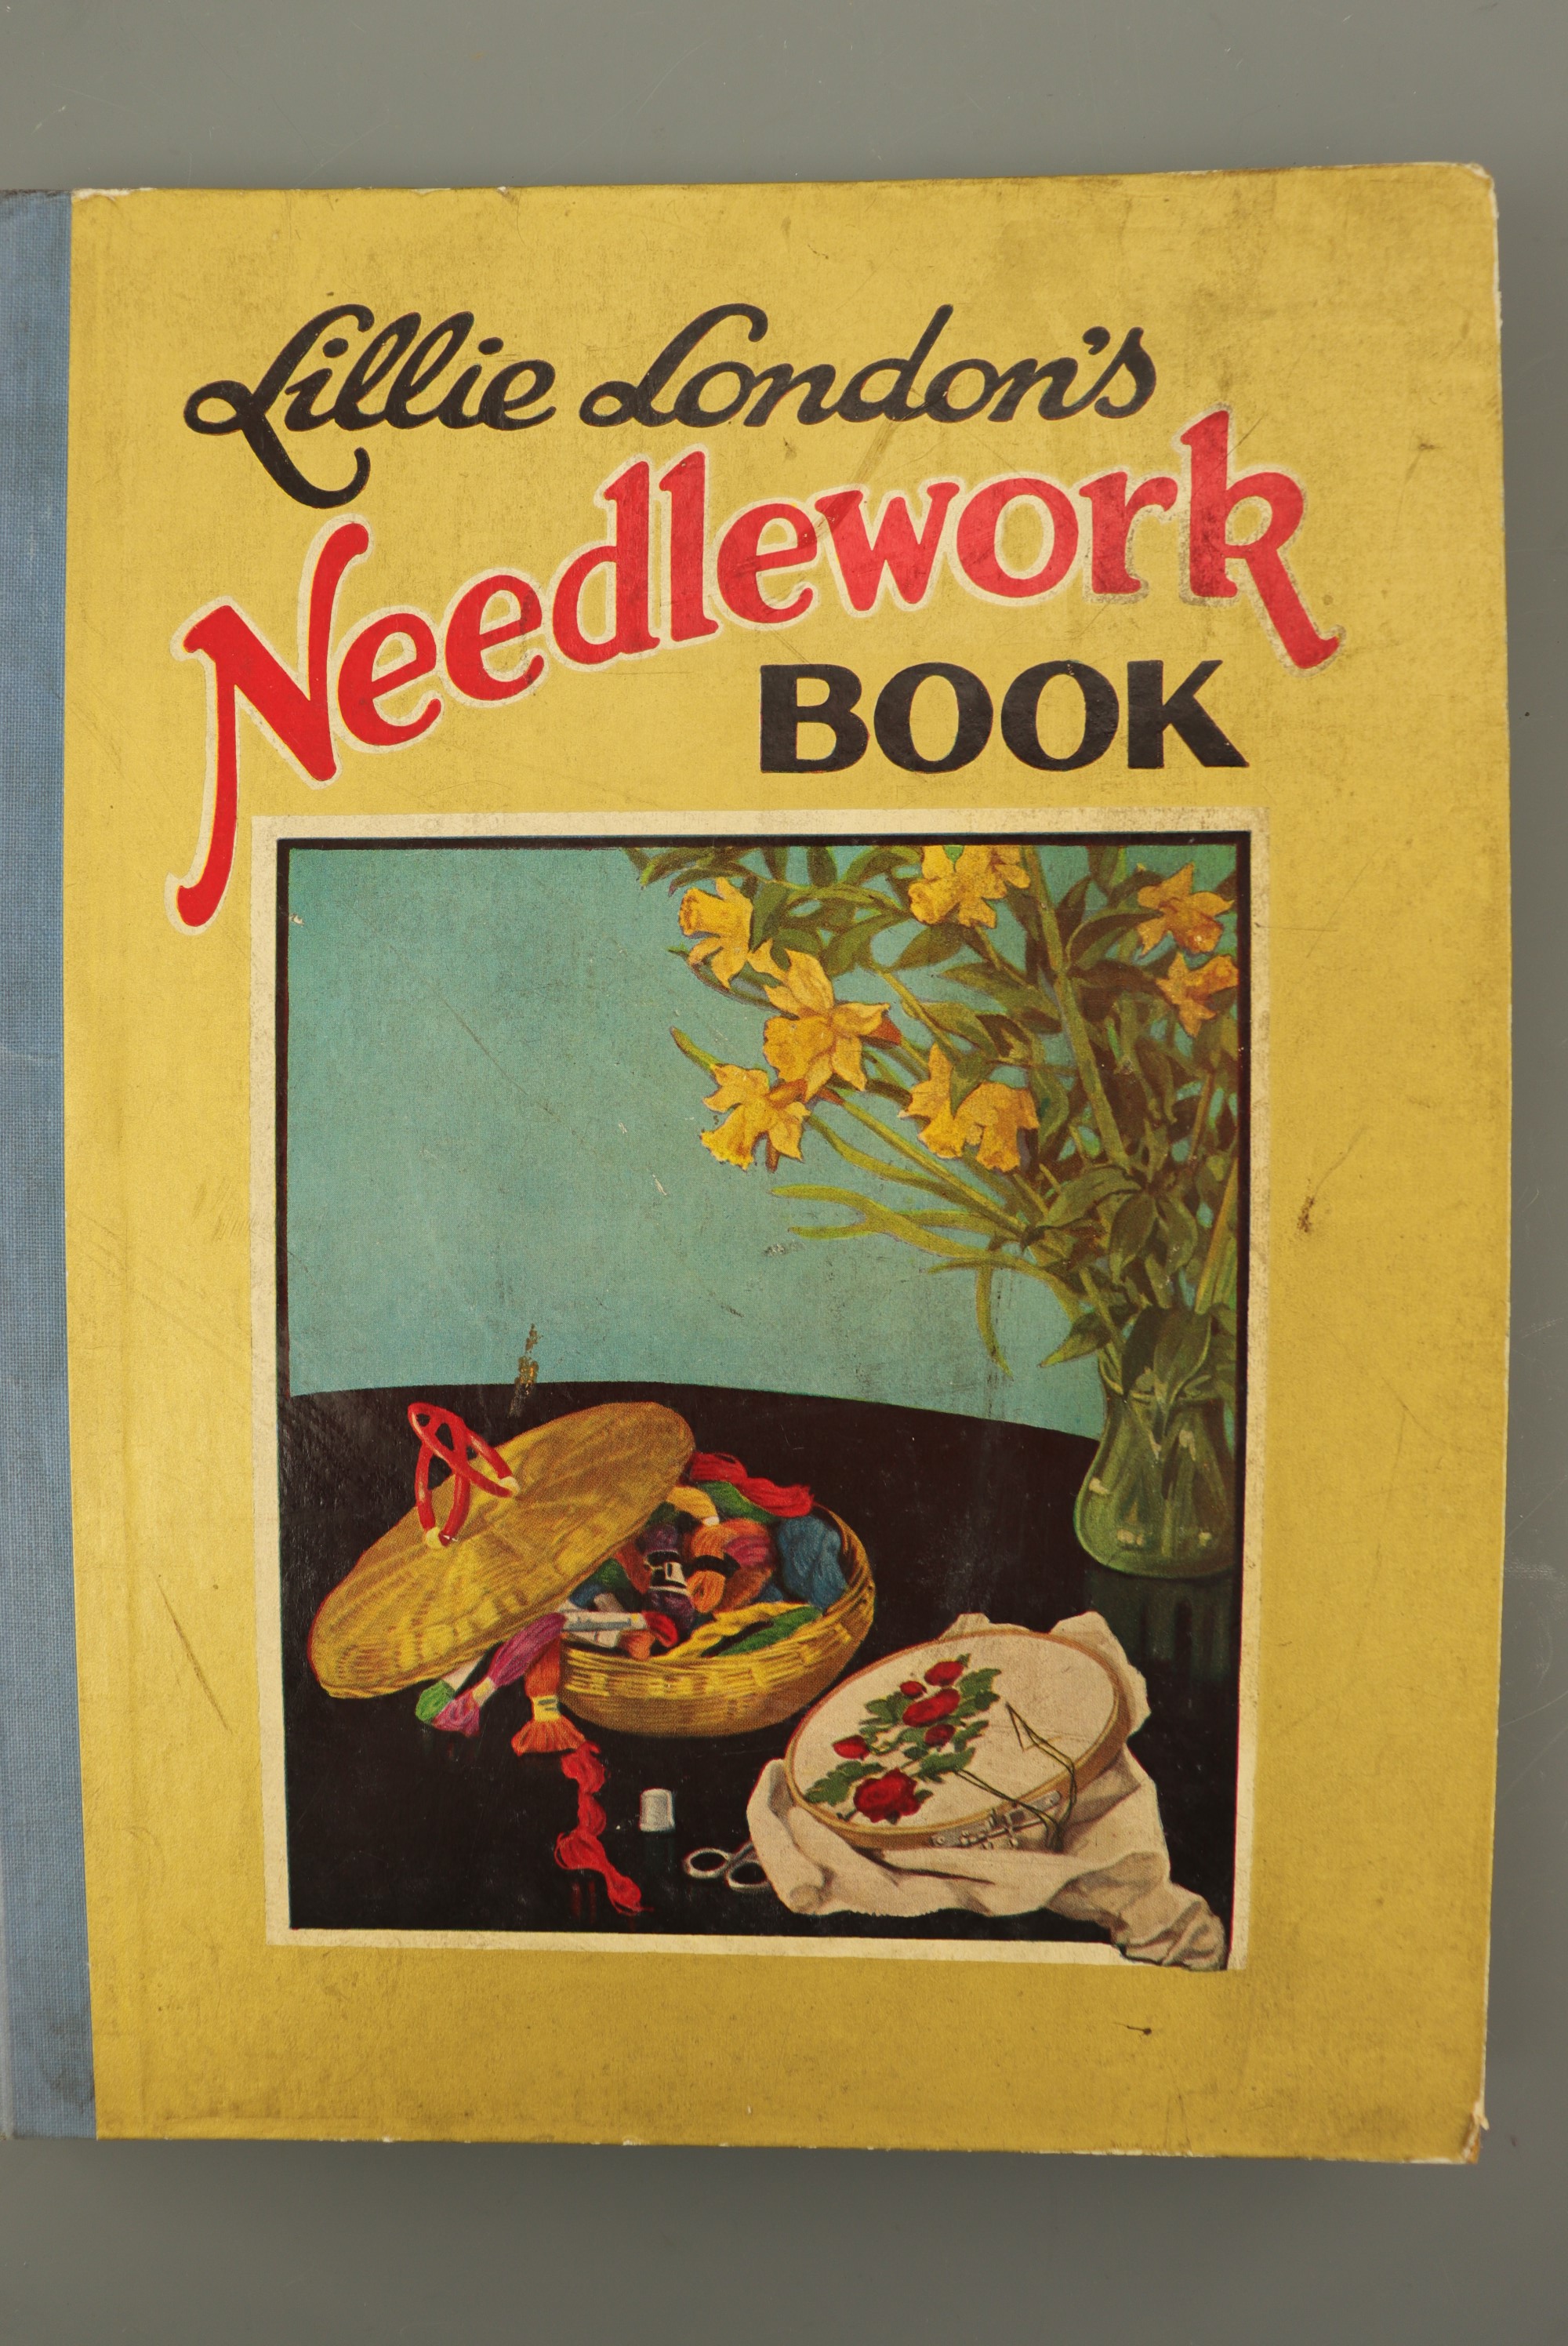 A 1930s illustrated volume of home needlework craft projects "Lillie London's Needlework Book",